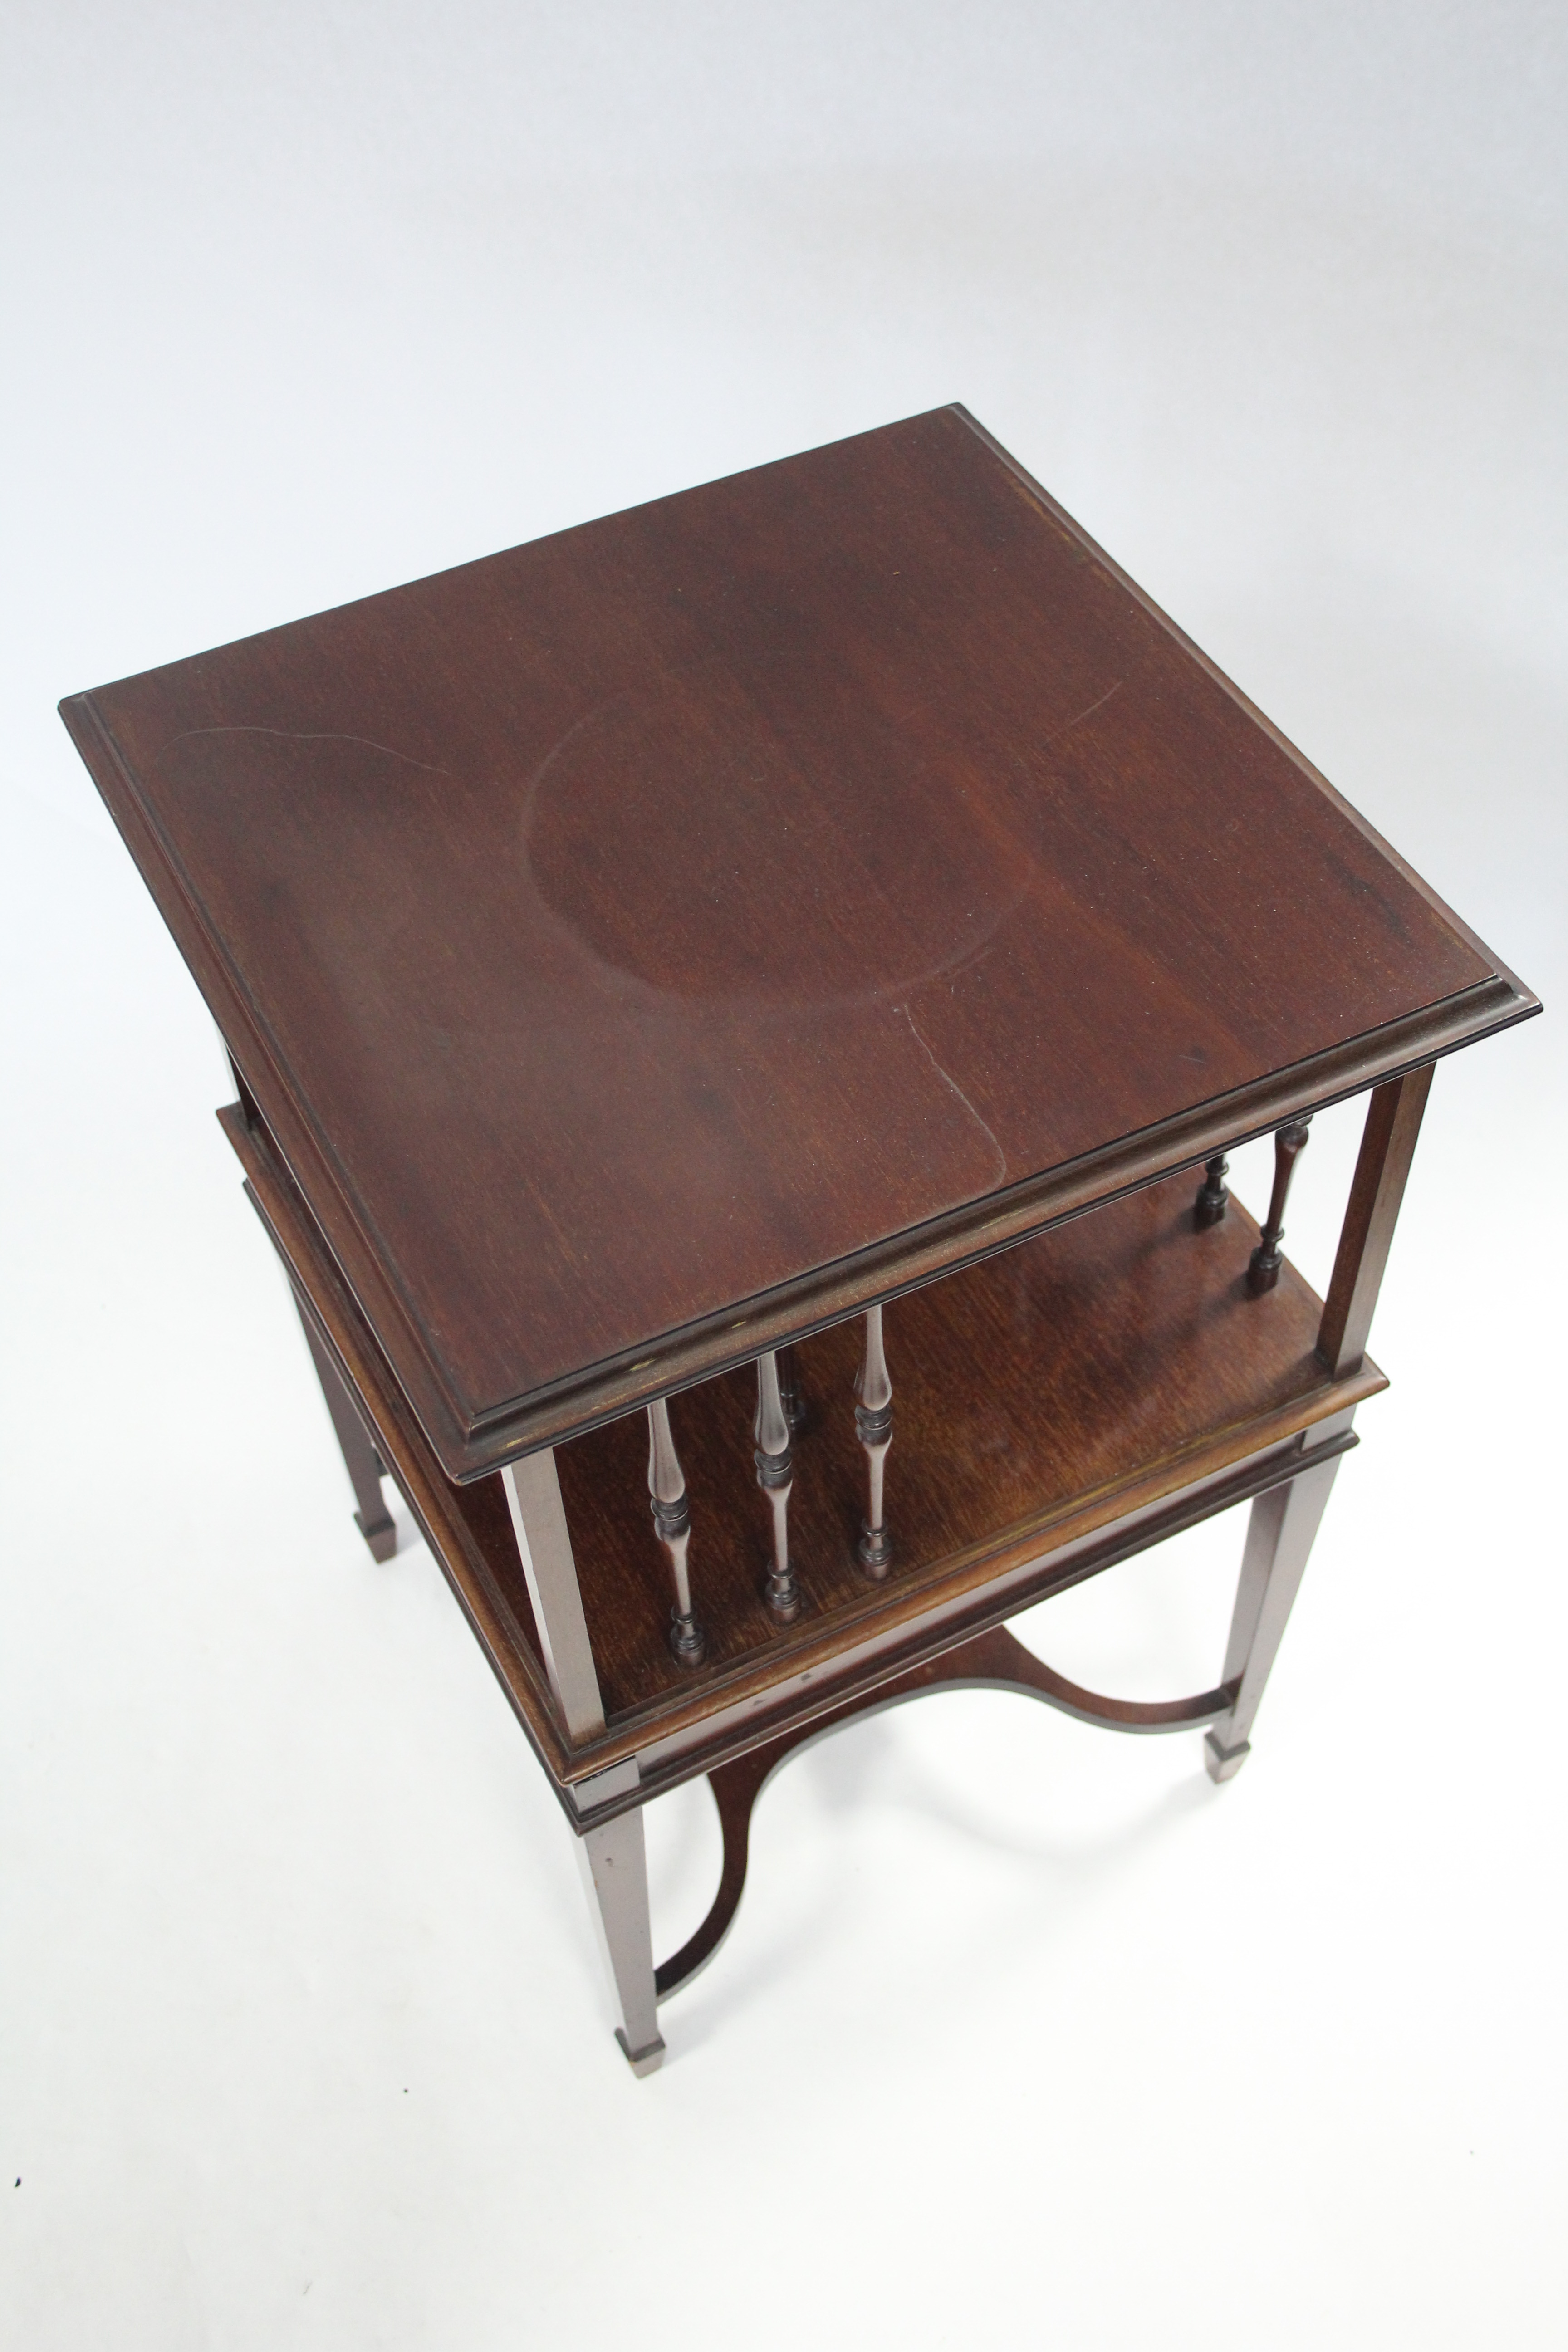 A 19th century mahogany small square revolving bookcase with central turned column, each side with - Image 3 of 3